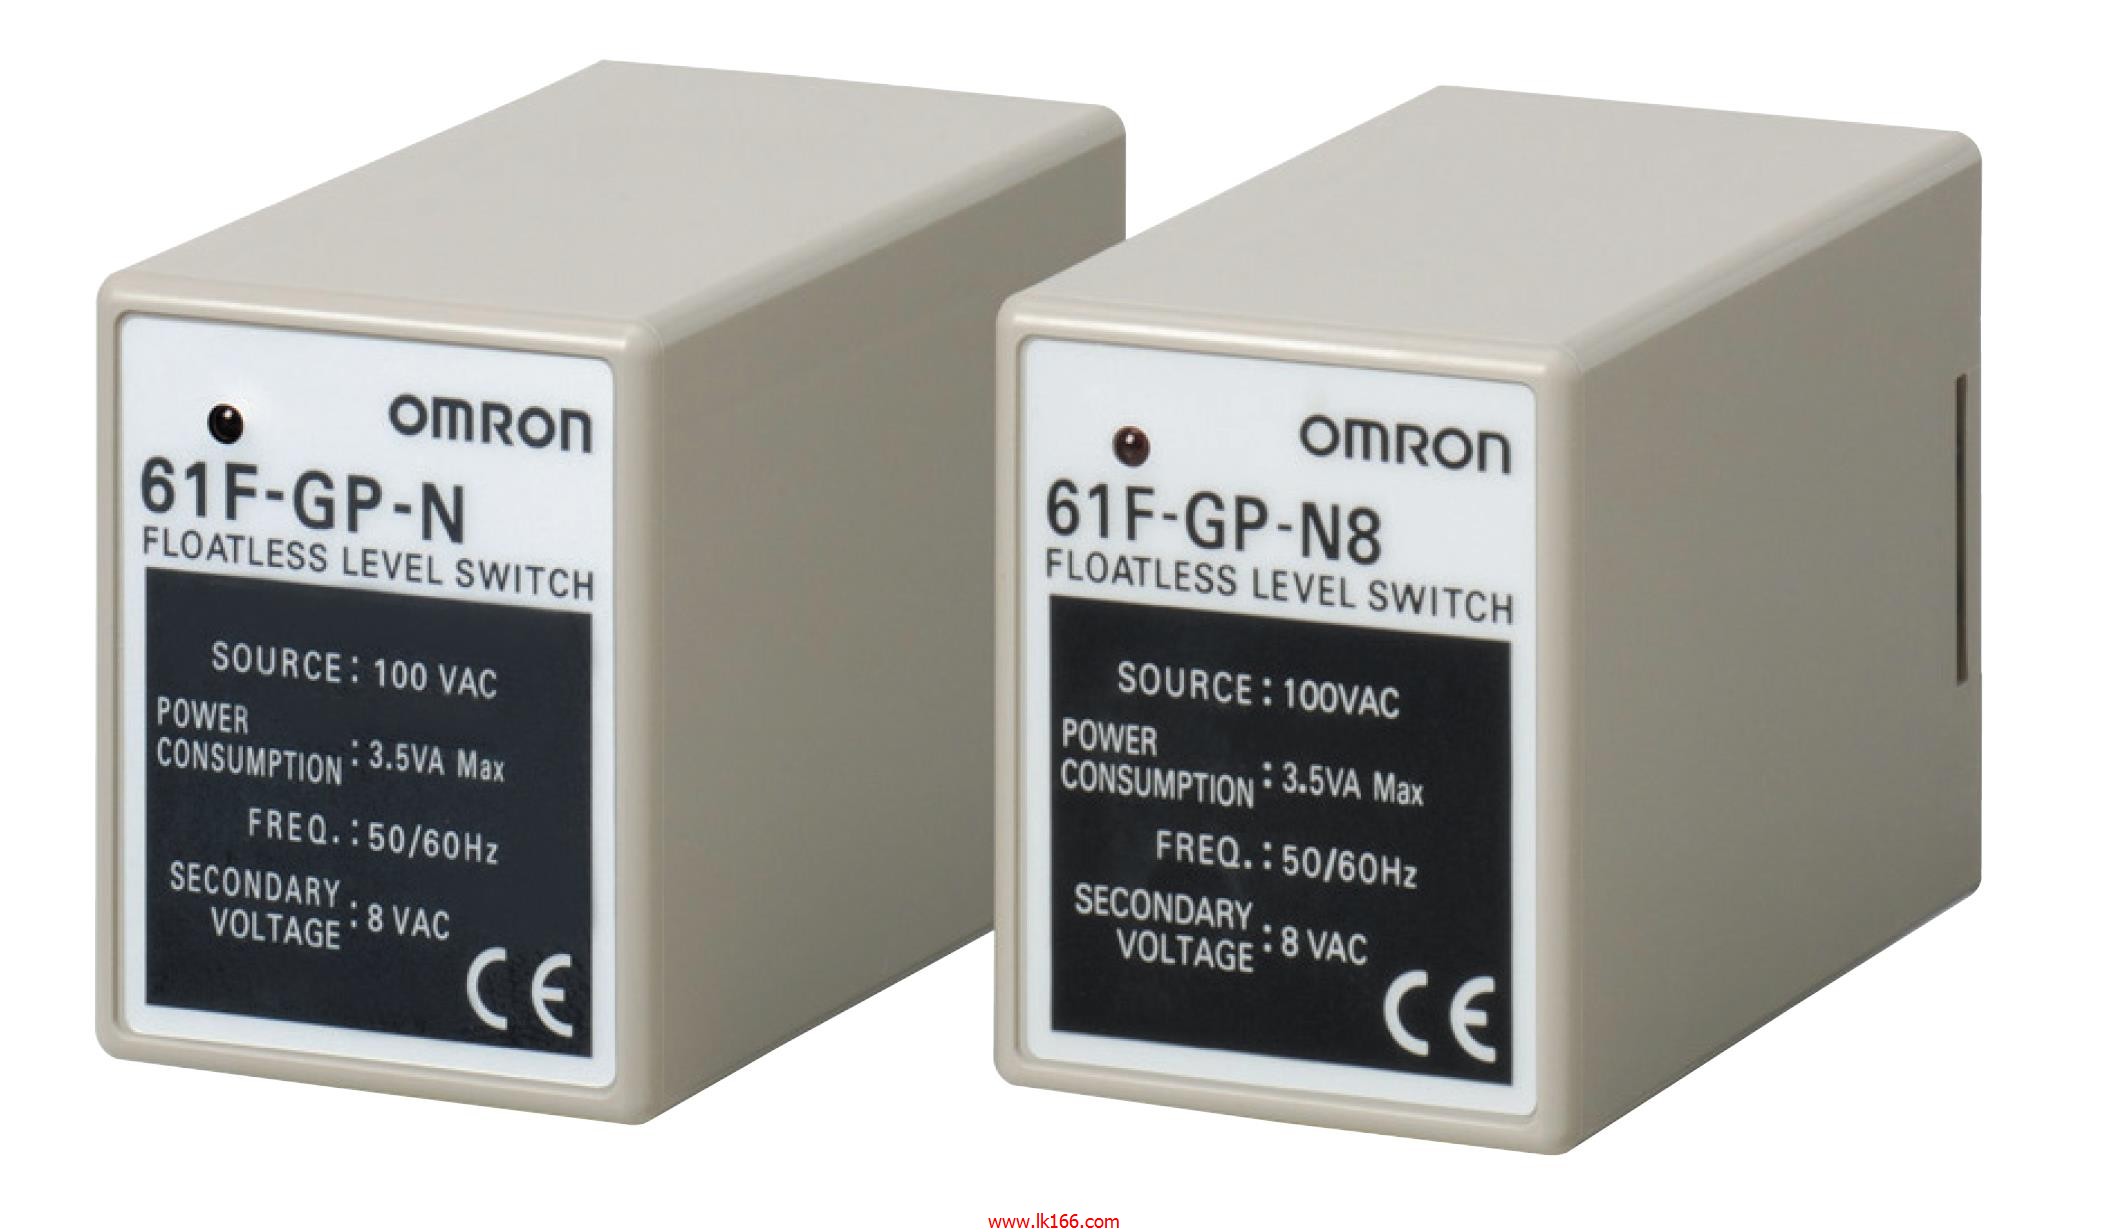 OMRON Floatless Level Switch (Compact, Plug-in Type) 61F-GP-N Series